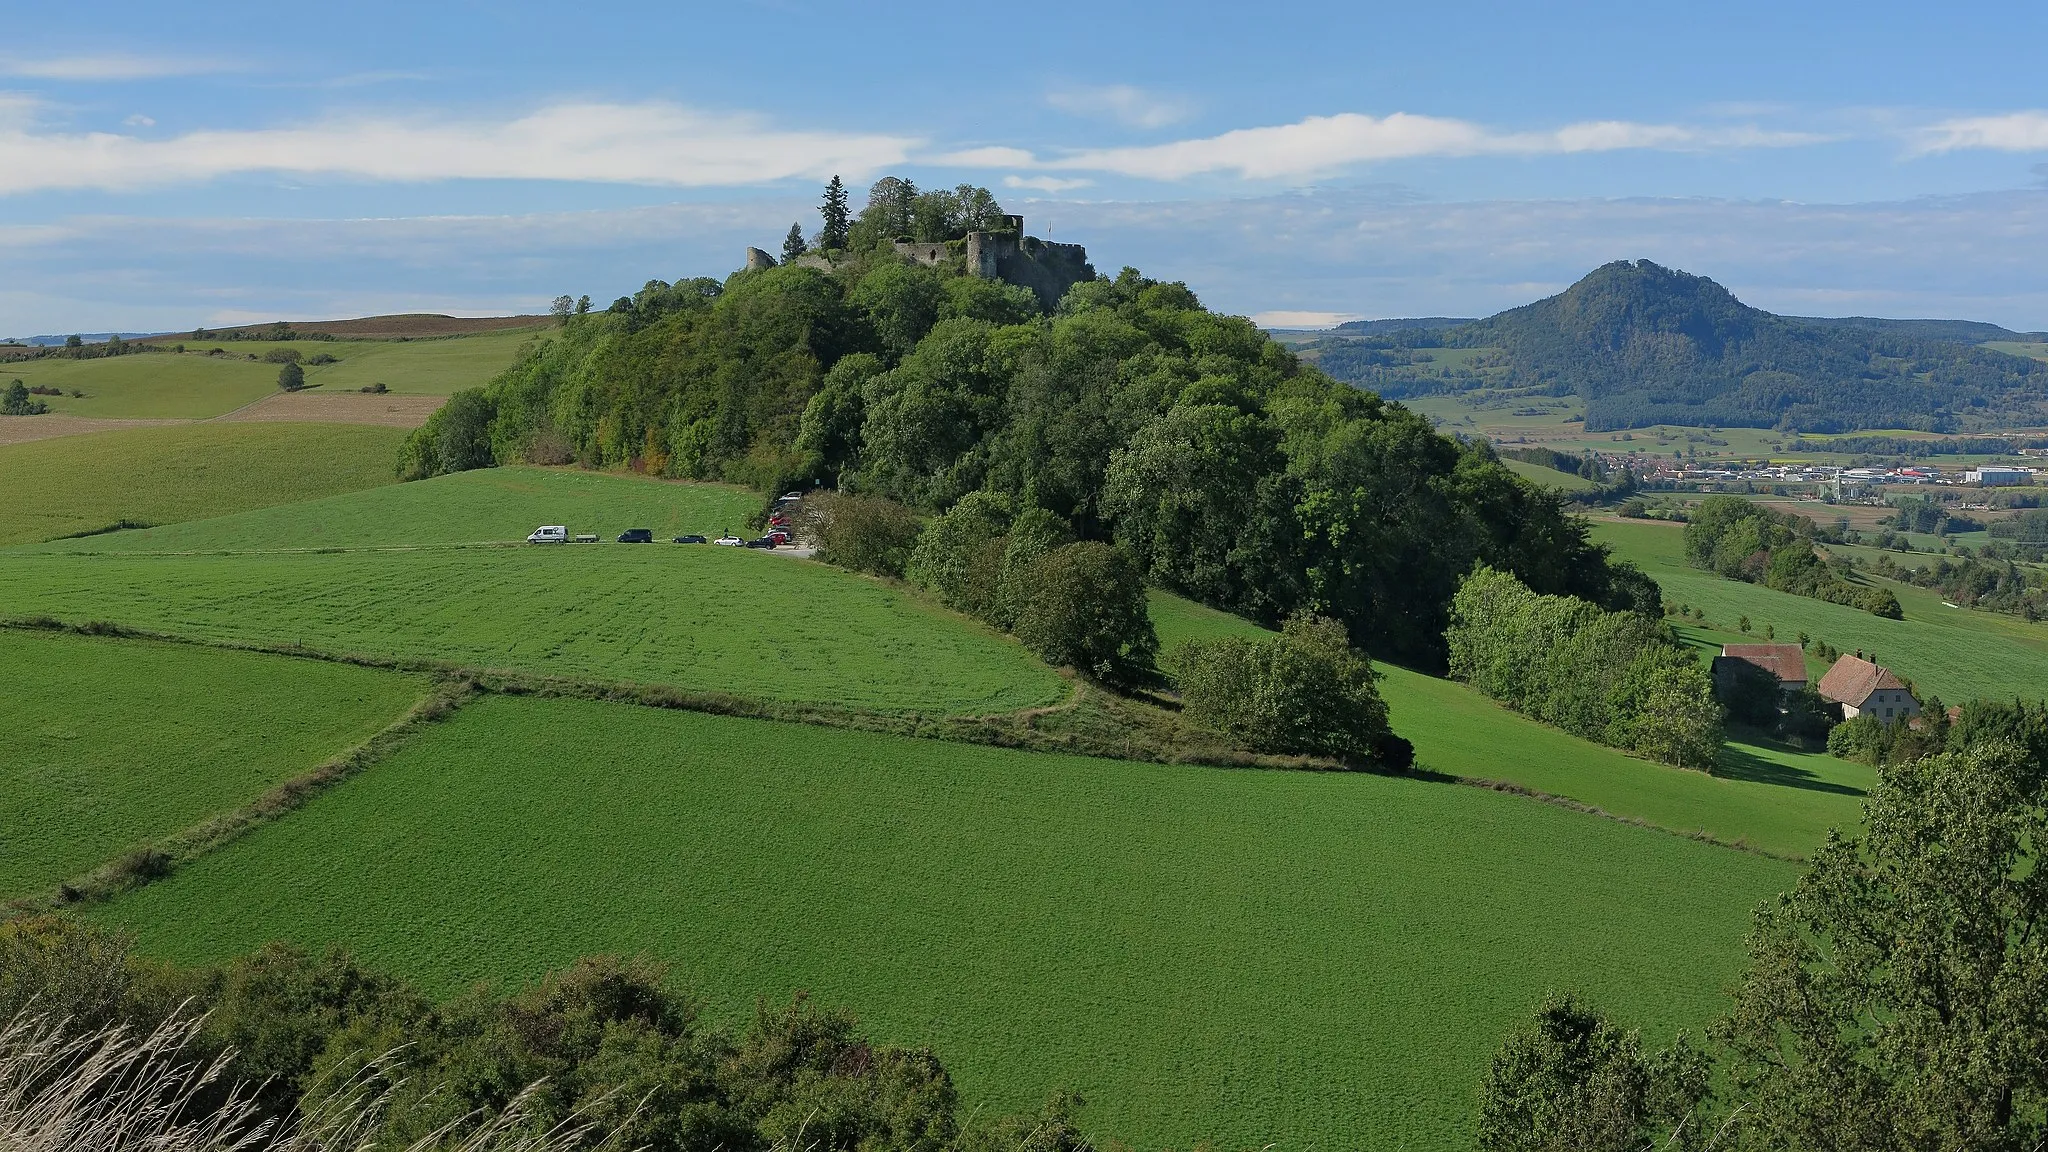 Photo showing: Mägdeberg castle on the Mägdeberg mountain. In the background on the right the Hohenhewen mountain